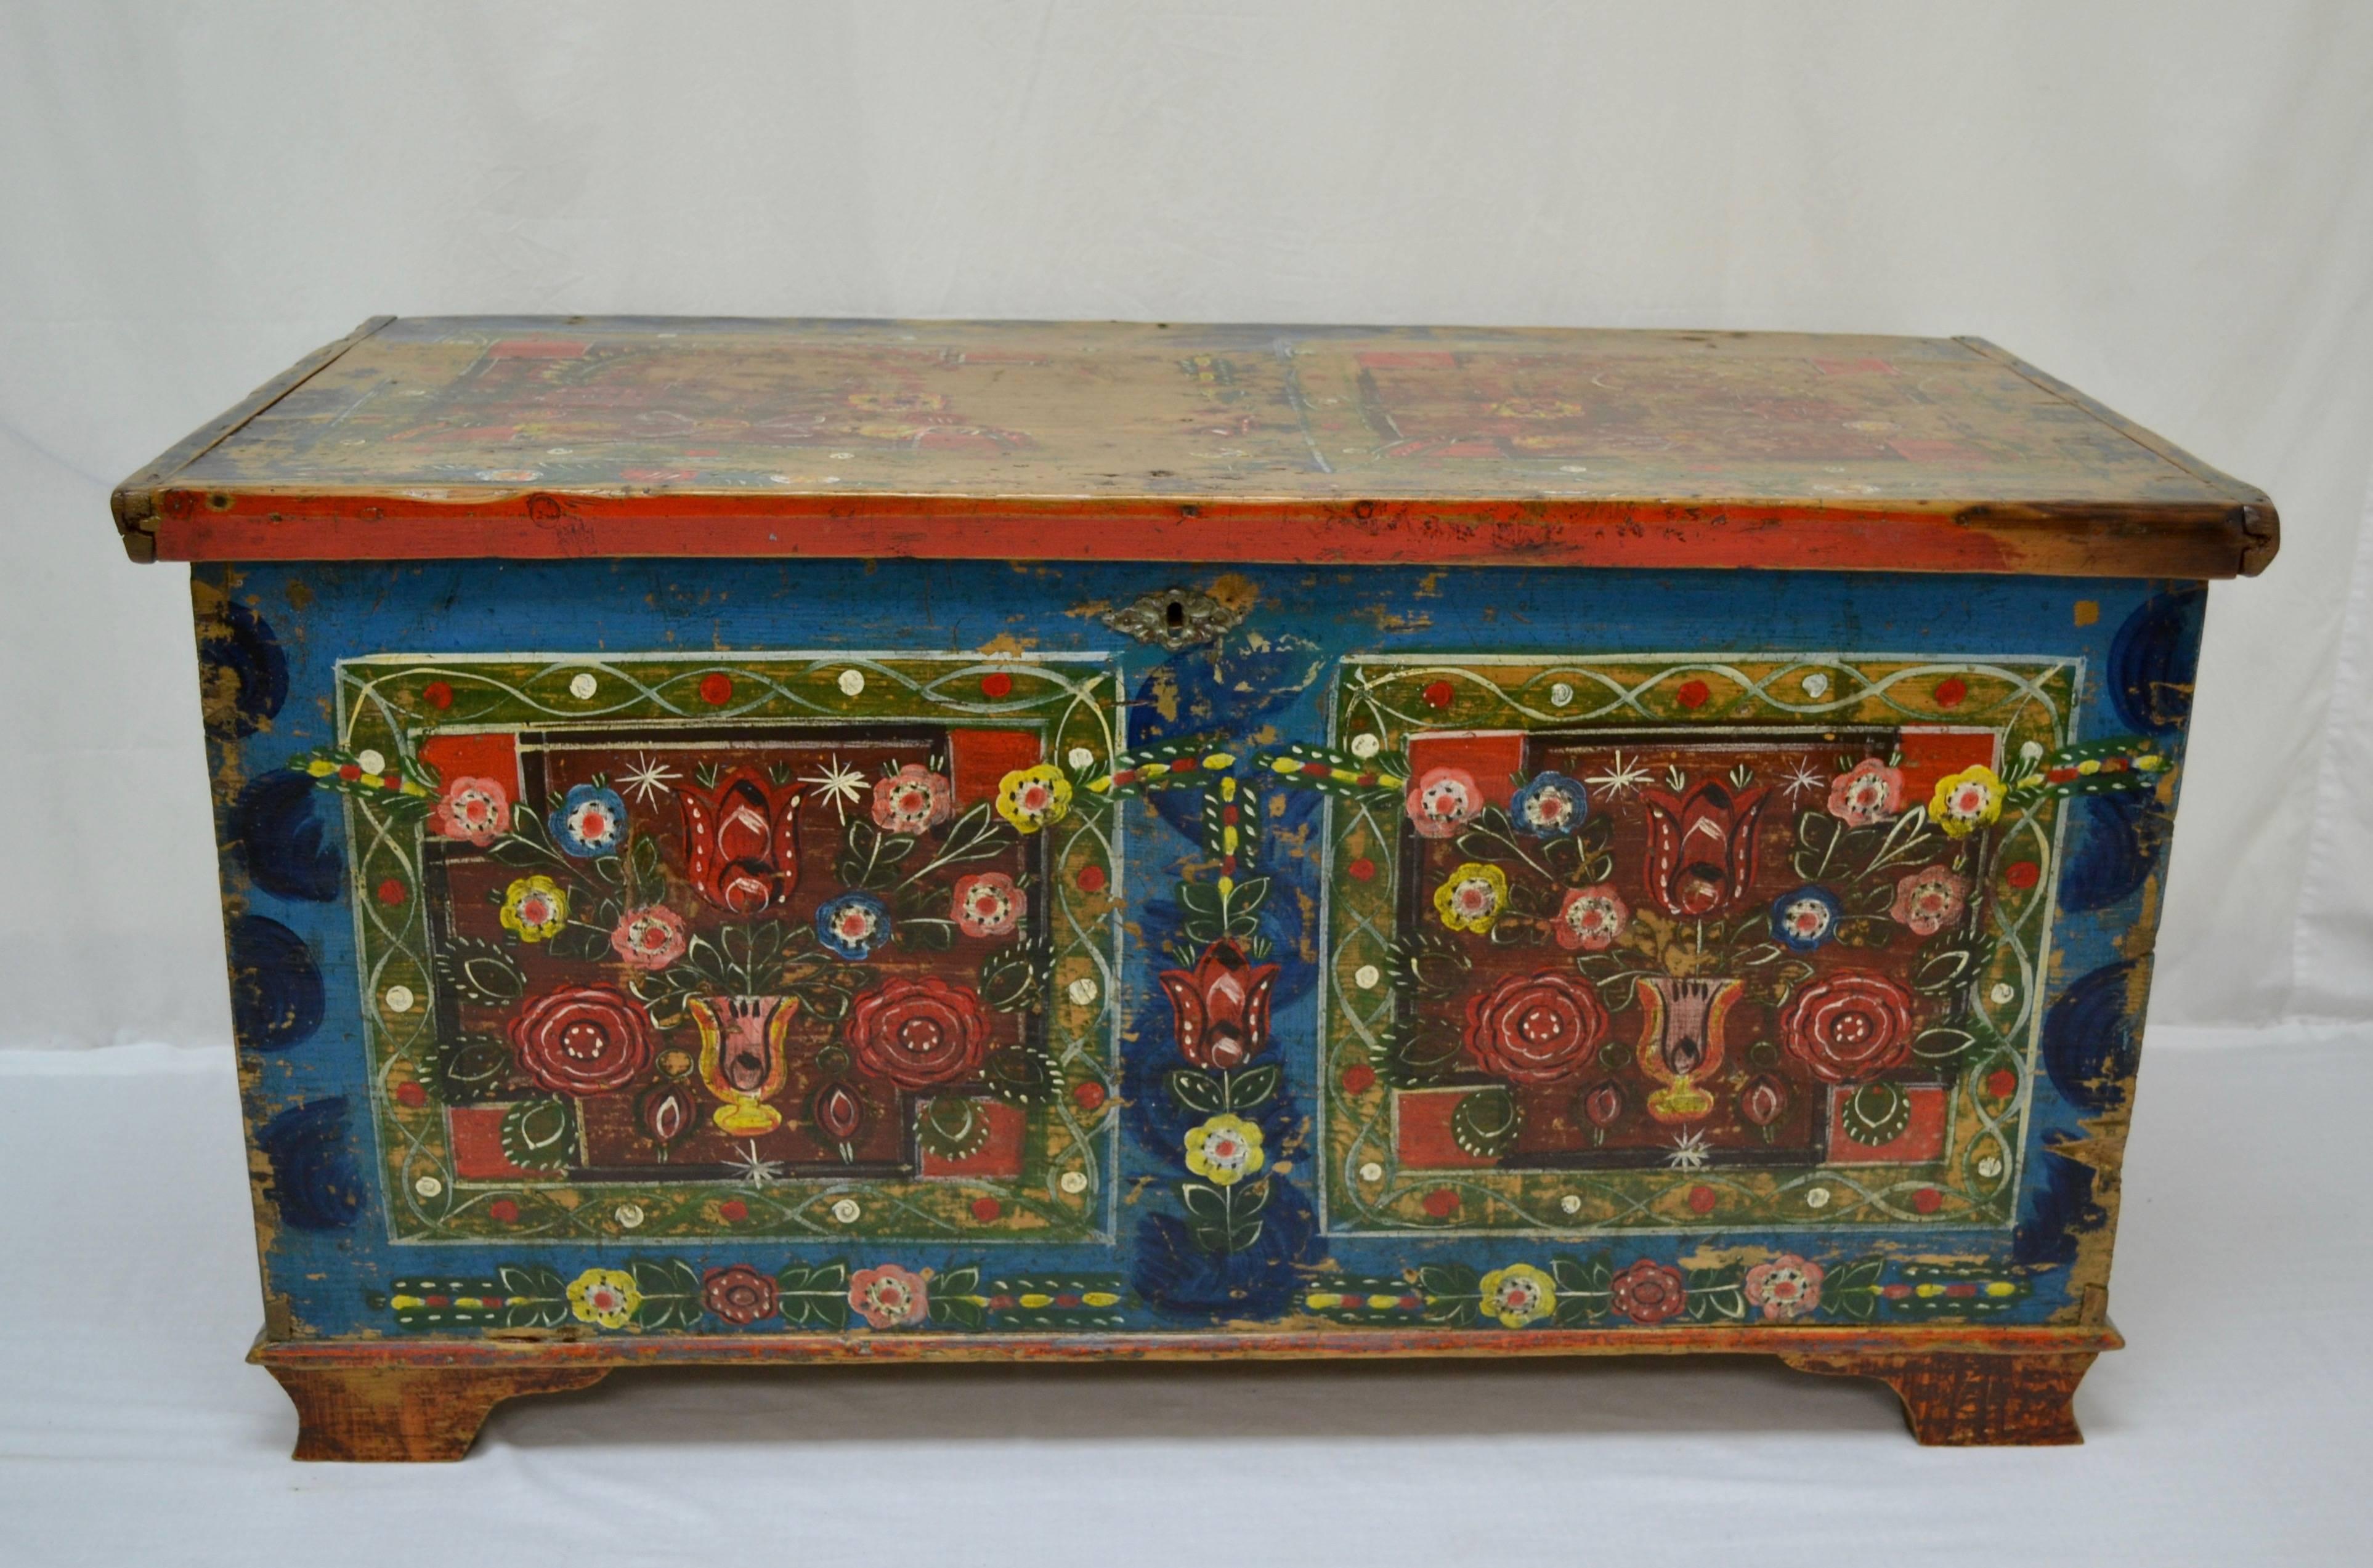 A piece of relatively plain box construction, with no embellishments to the woodwork, this hand-cut dovetailed pine trunk or blanket chest is distinguished by the riot of colour on its front and top. On a bright blue ground are two painted panels,